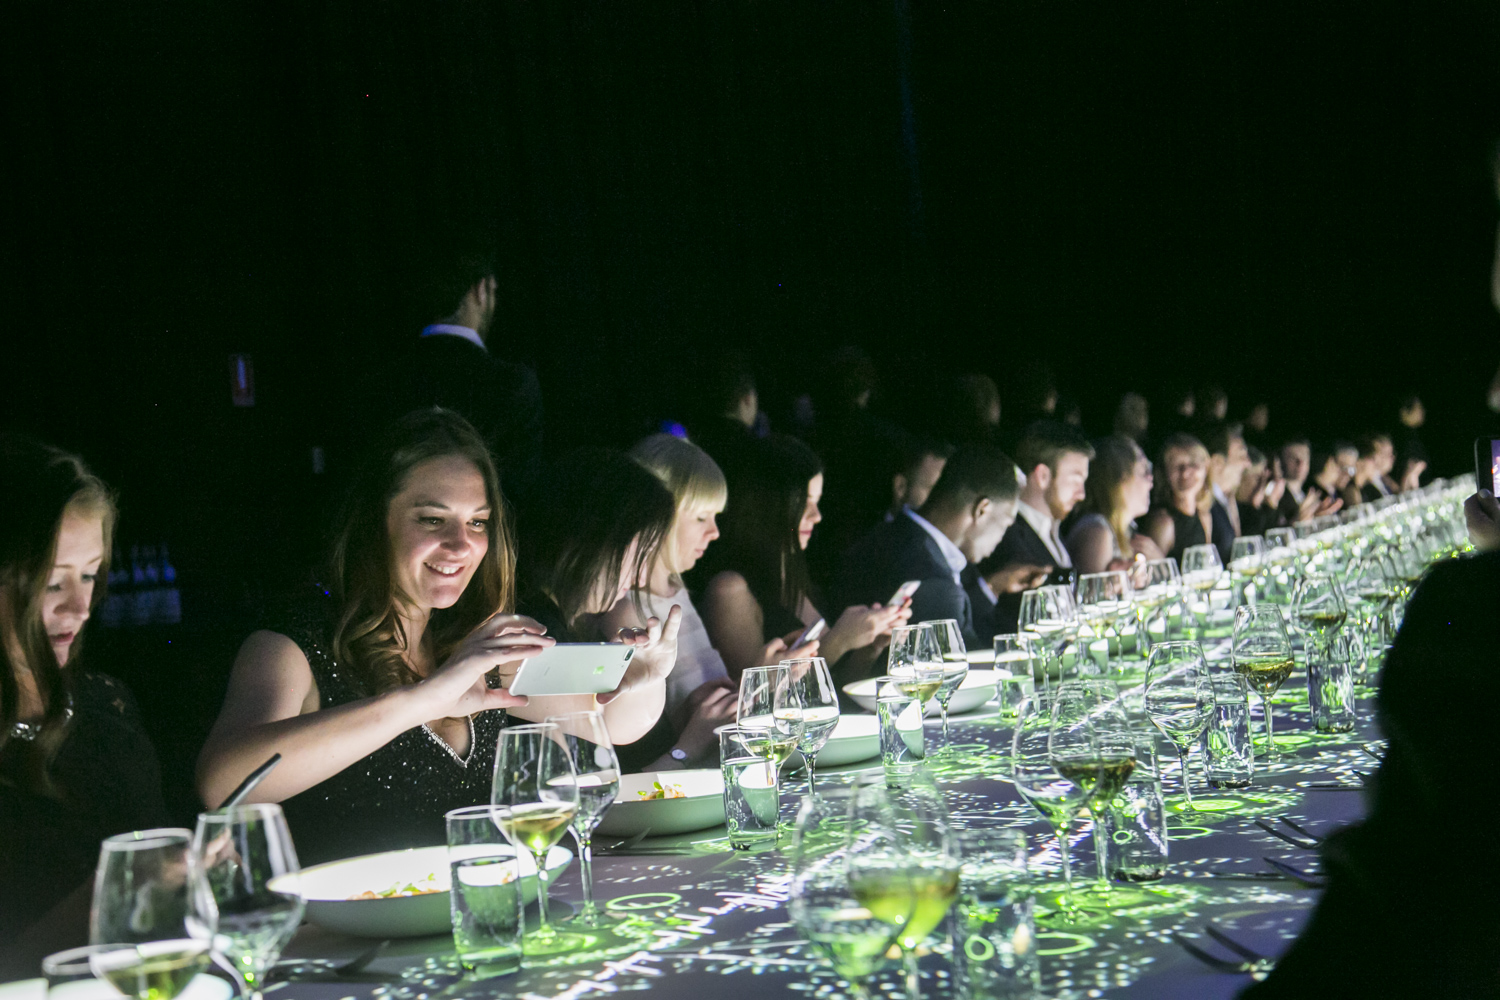 Dom Perignon dinner: Learning about champagne